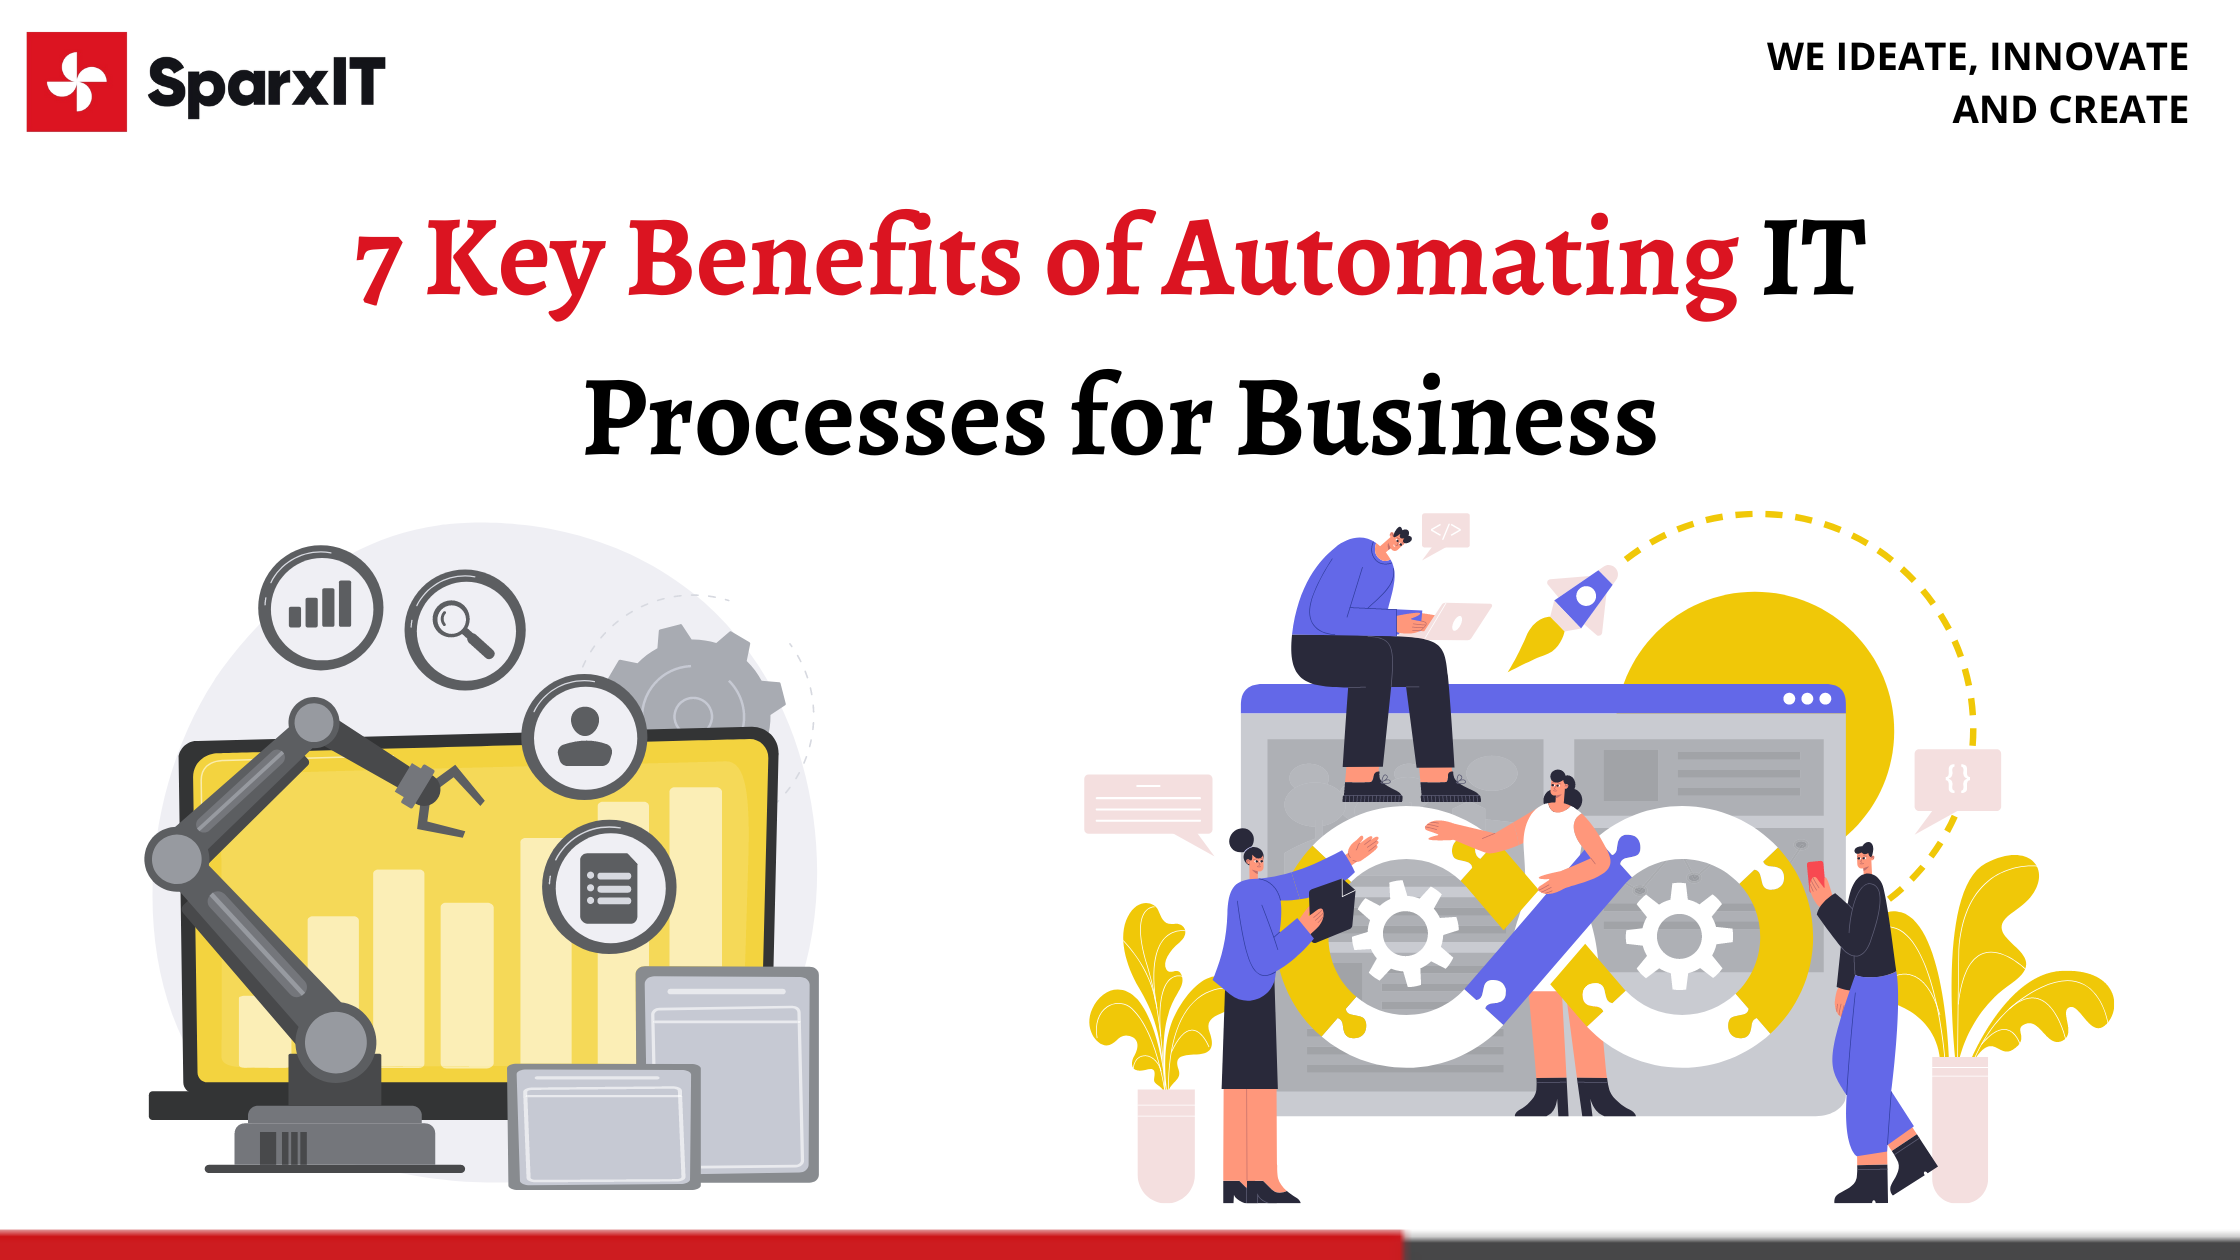 7 Key Benefits of Automating IT Processes for Business